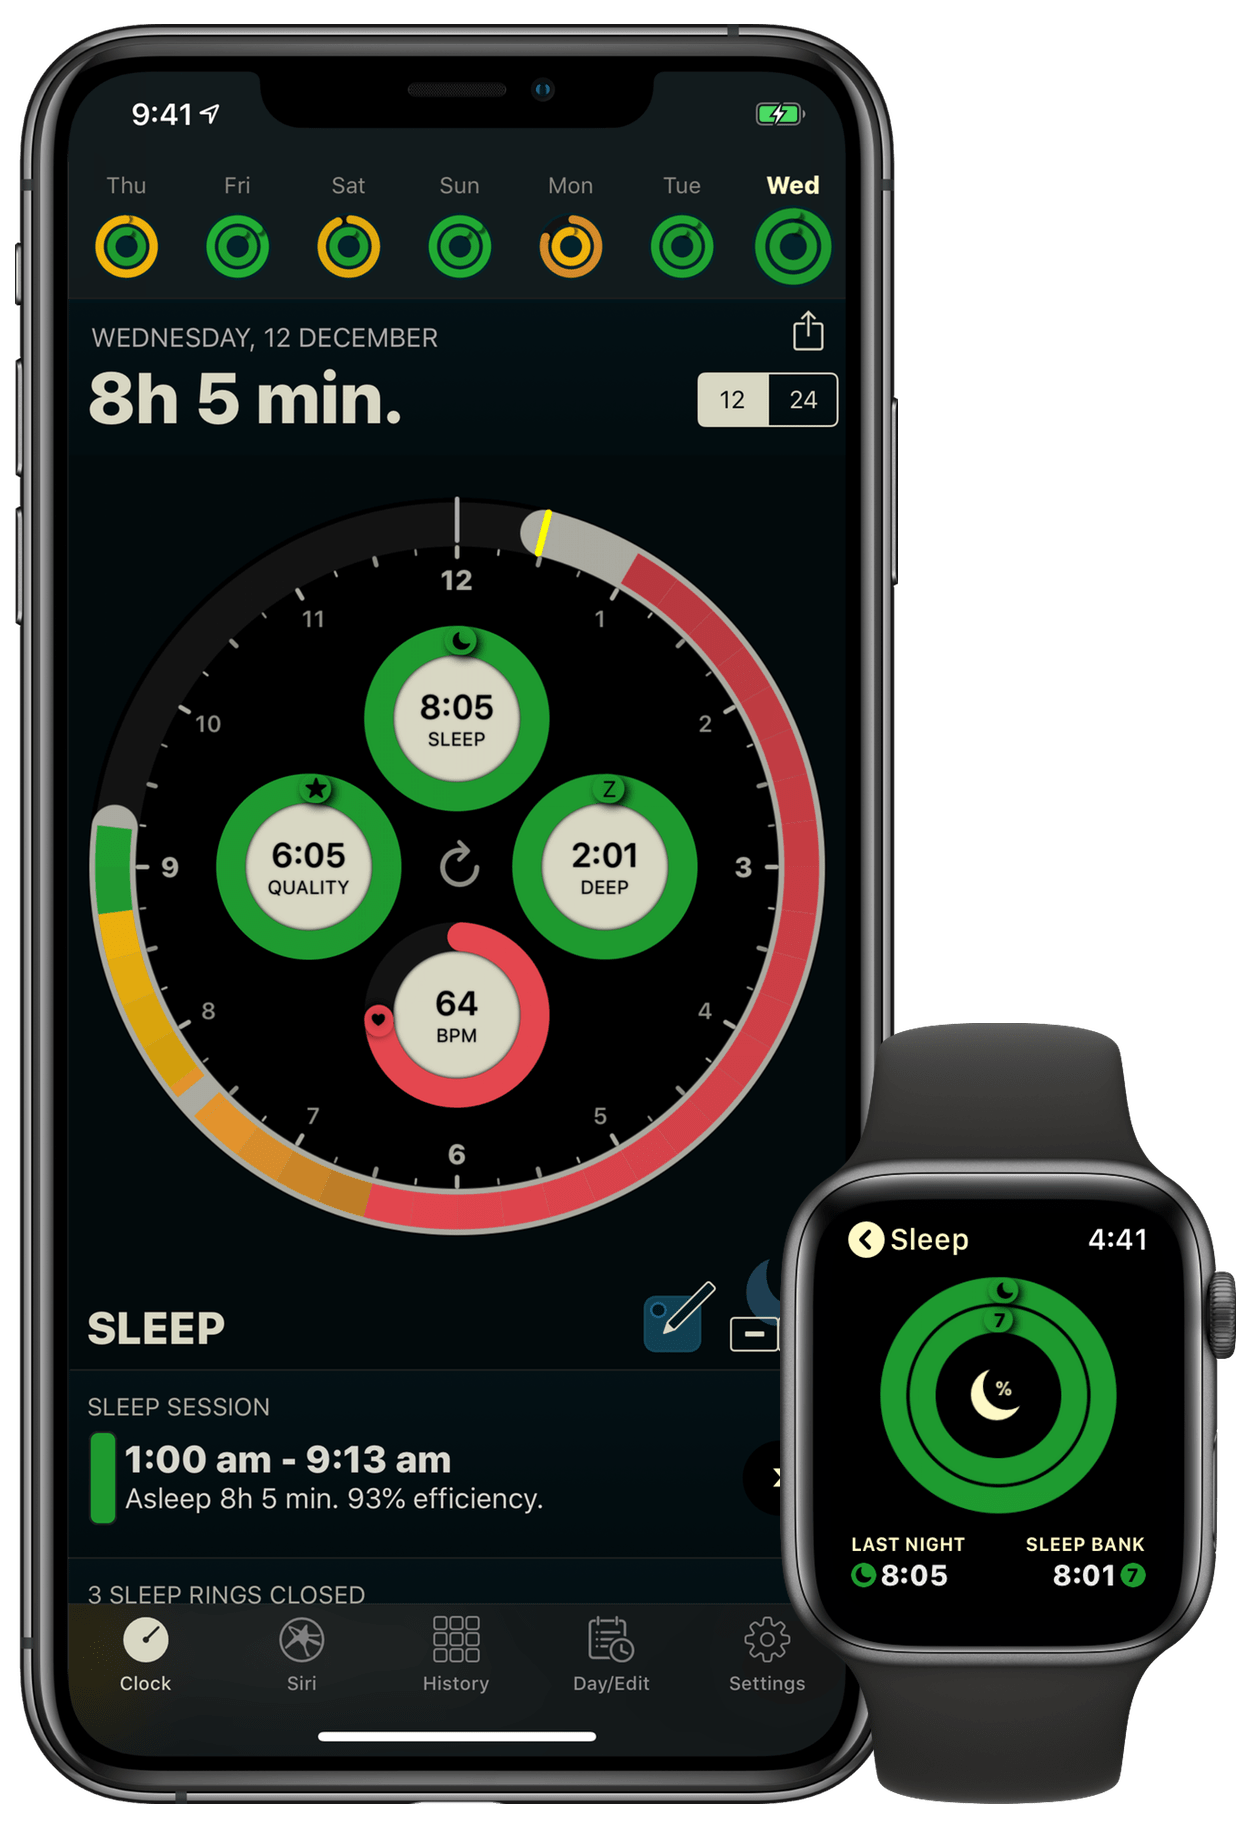 AutoSleep application, one of the most famous in the App Store for sleep monitoring